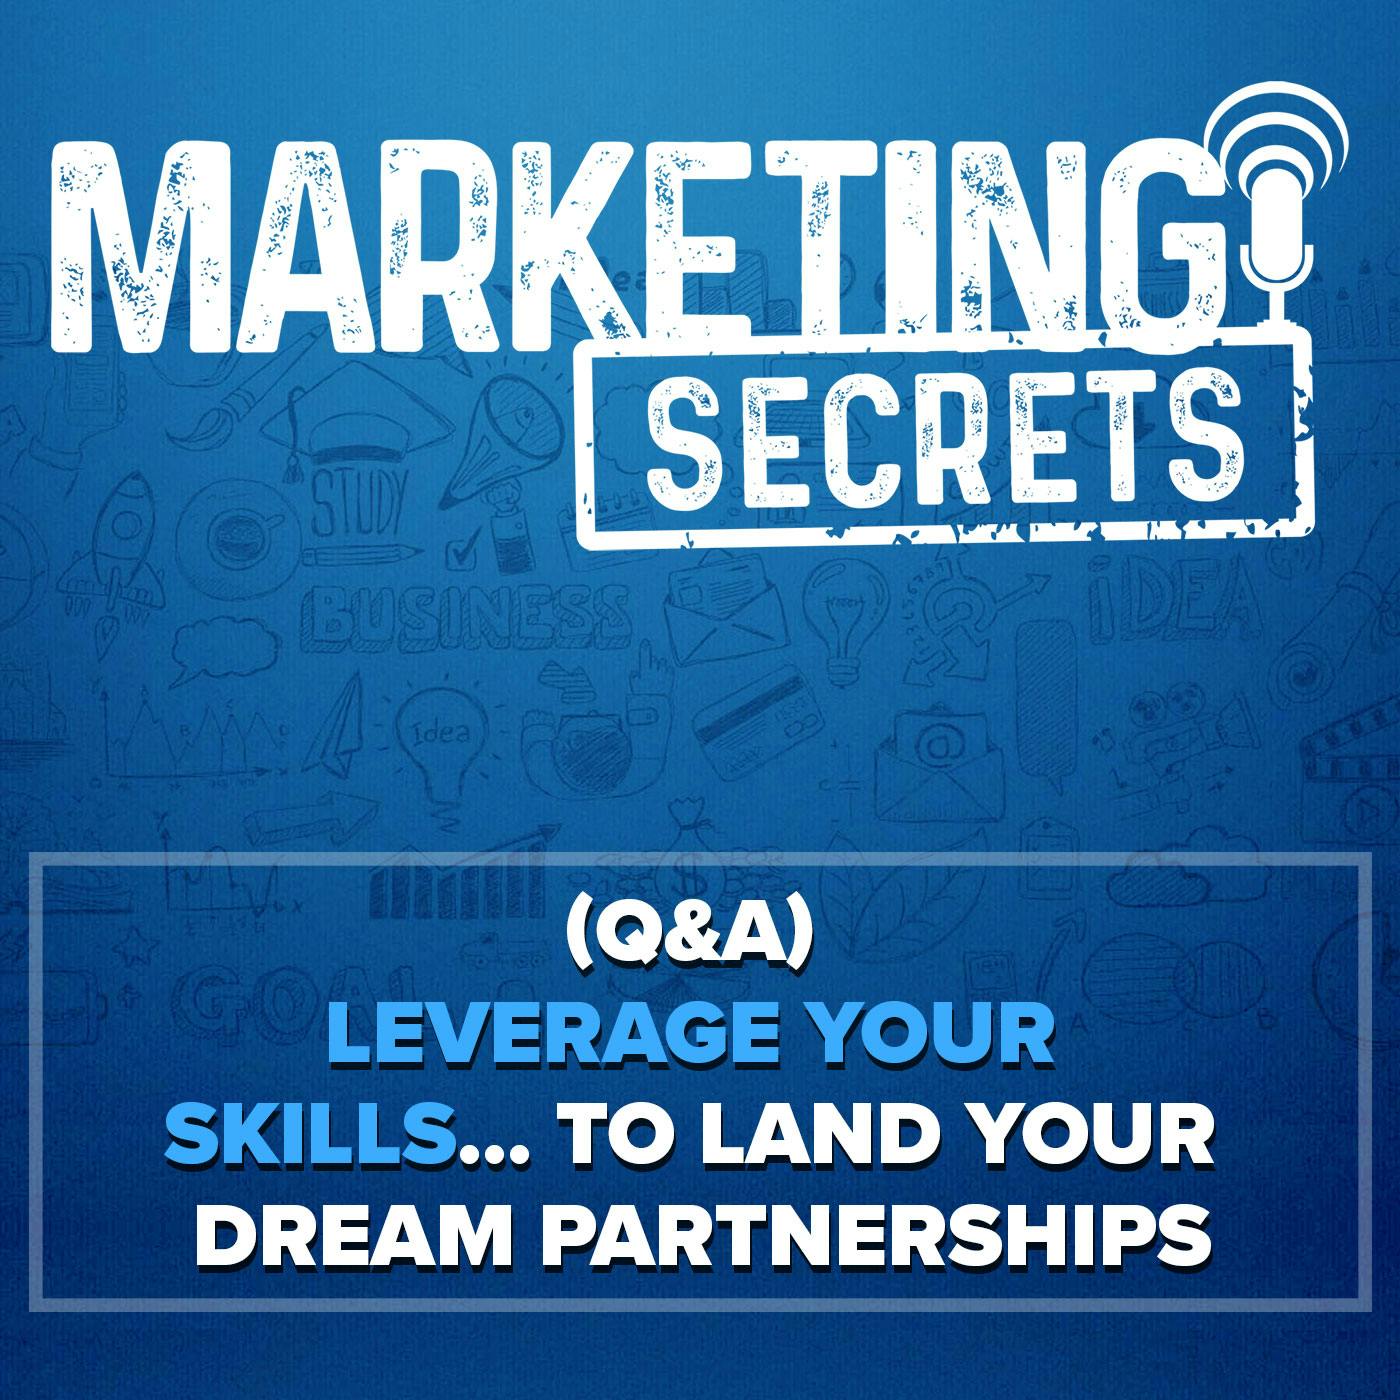 (Q&A) Leverage Your SKILLS... To Land Your Dream Partnerships